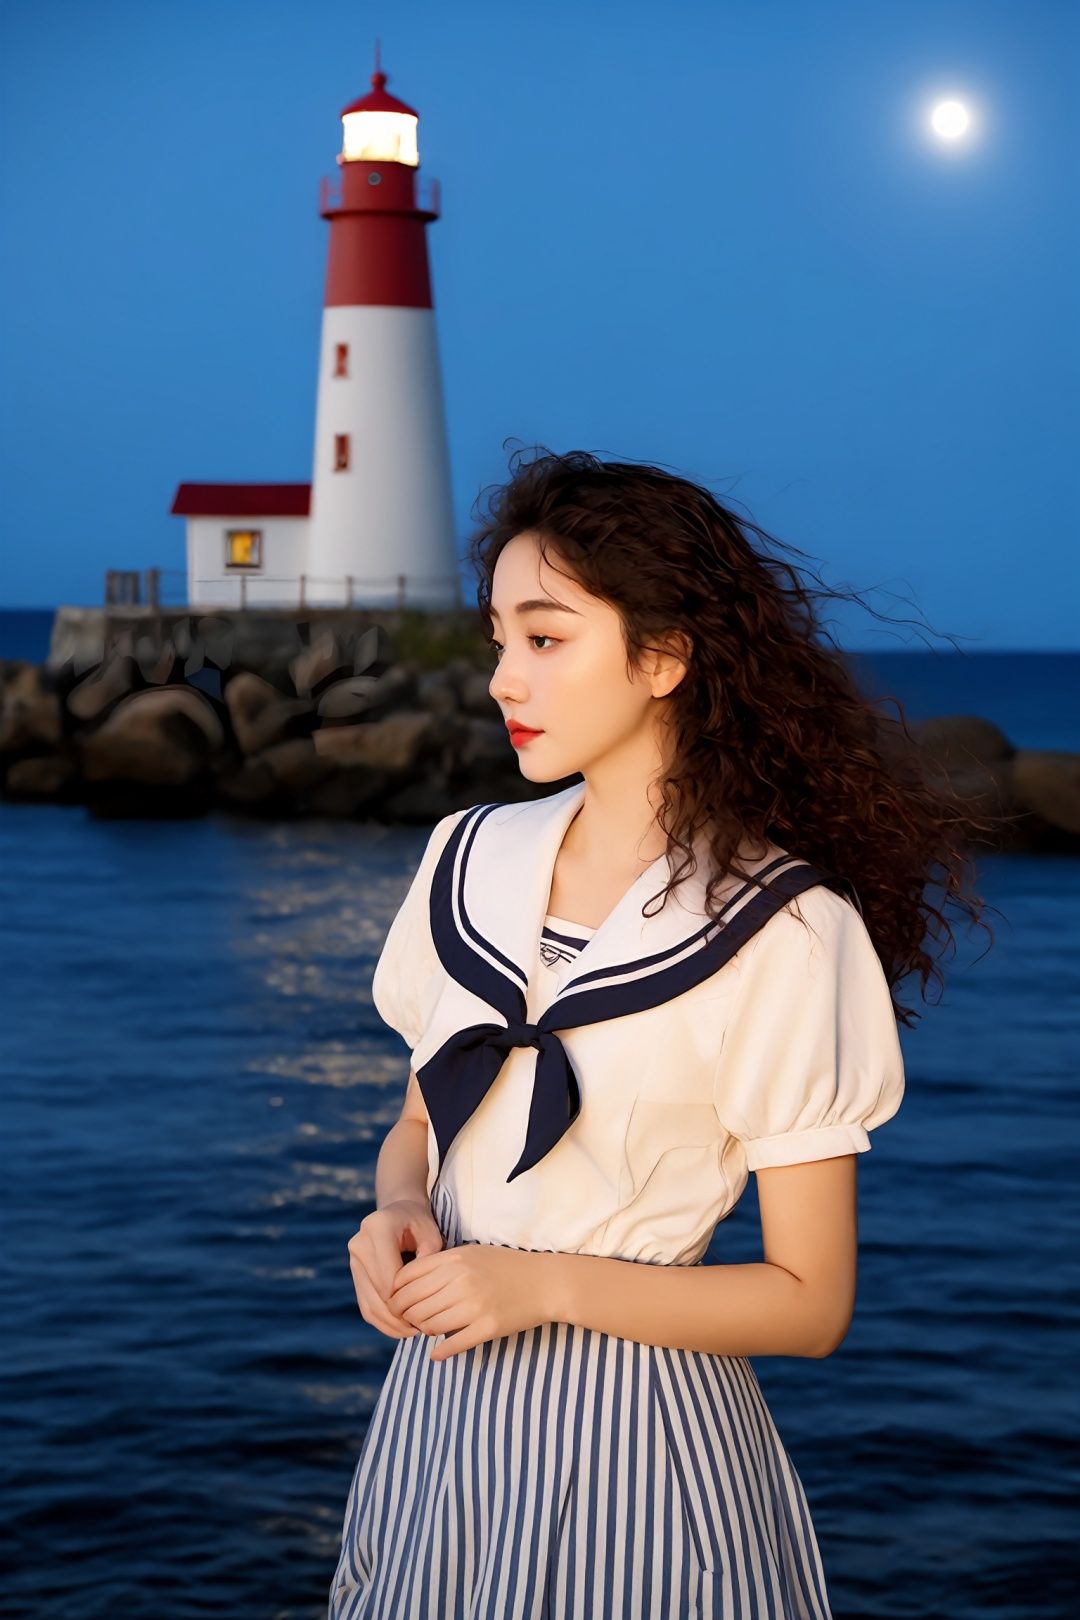  Real photos (1girl: 1.2), curly hair, (sailor suit: 1.3), (realistic style), (lonely lighthouse standing on the shore), (night), (moonlight), (breeze), (sparkling water), a clear stream flowing slowly, (natural scenery), (distant mountains), (starry sky), (peaceful atmosphere), master work, high detail, (close-up of characters)